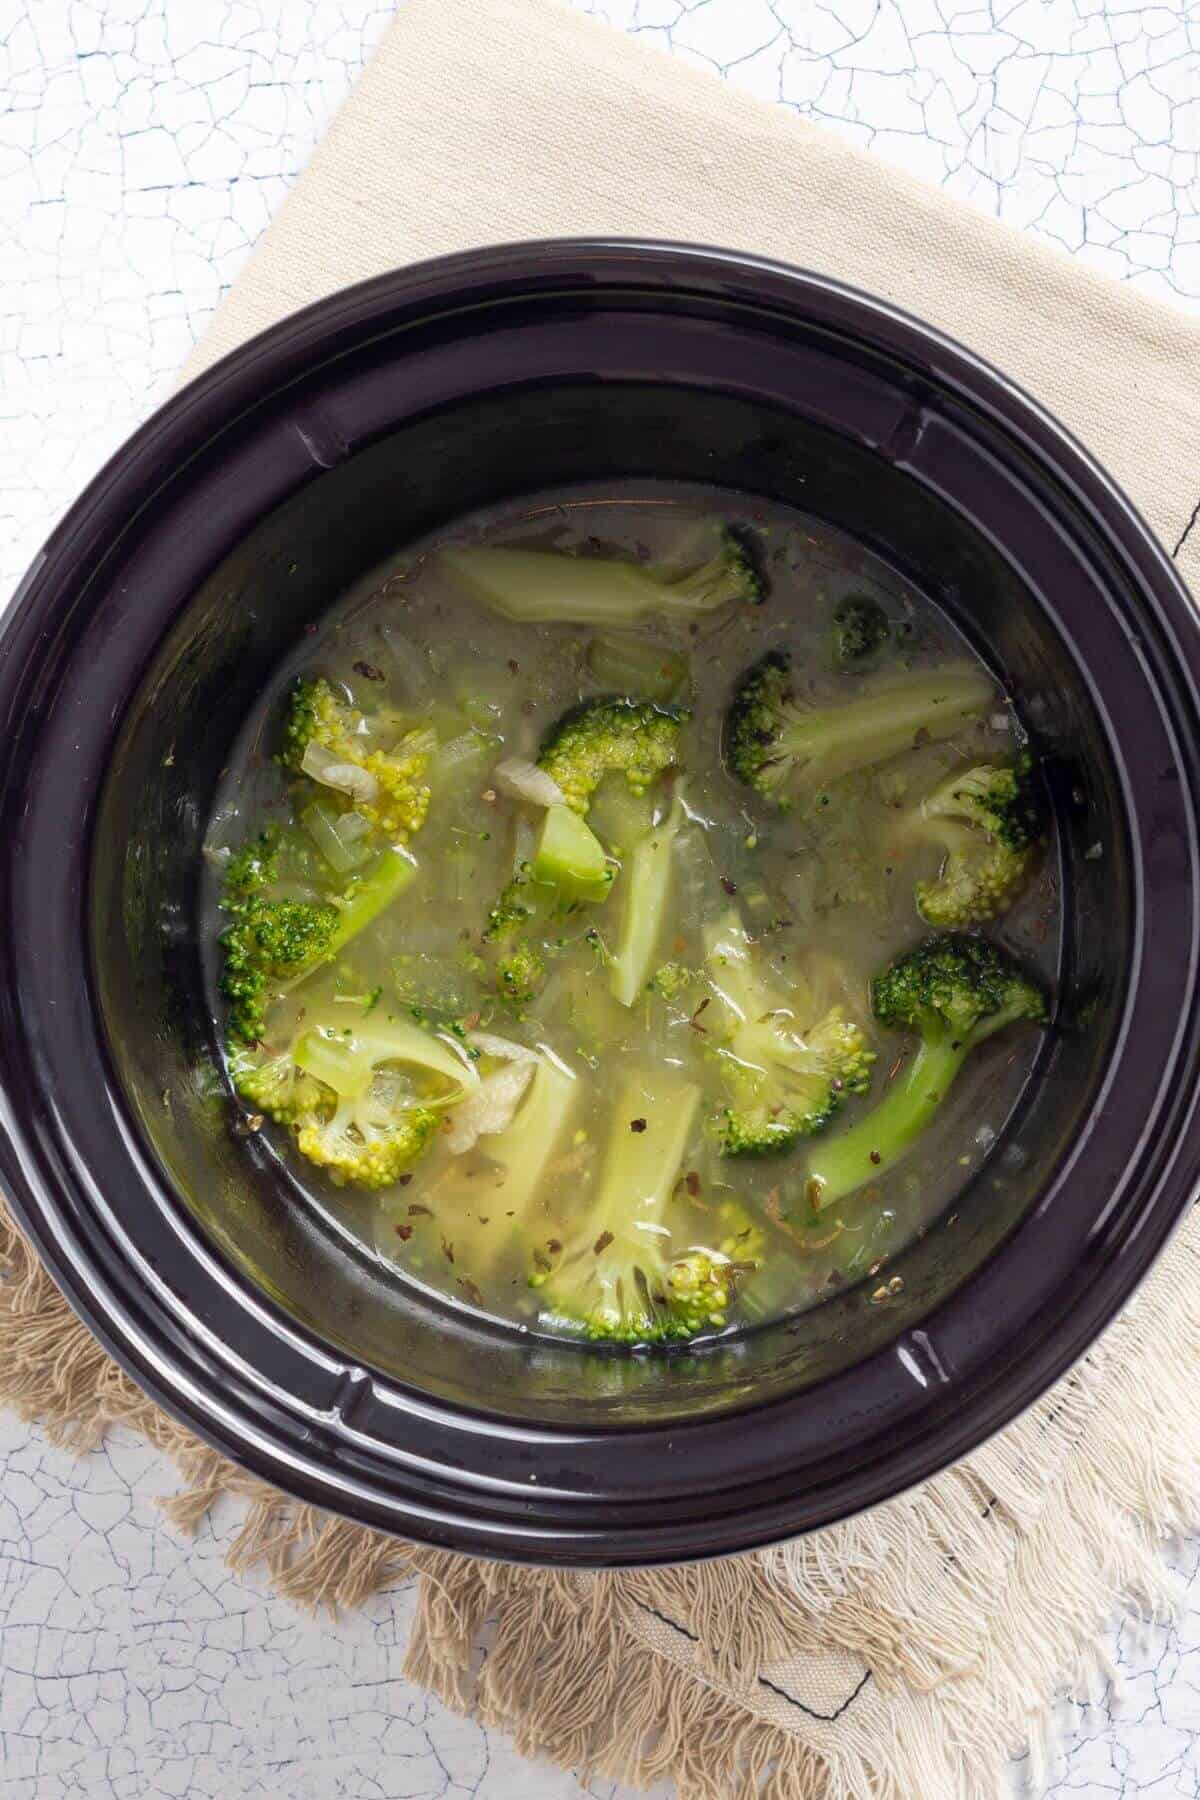 A crock pot of soup with broccoli in it.